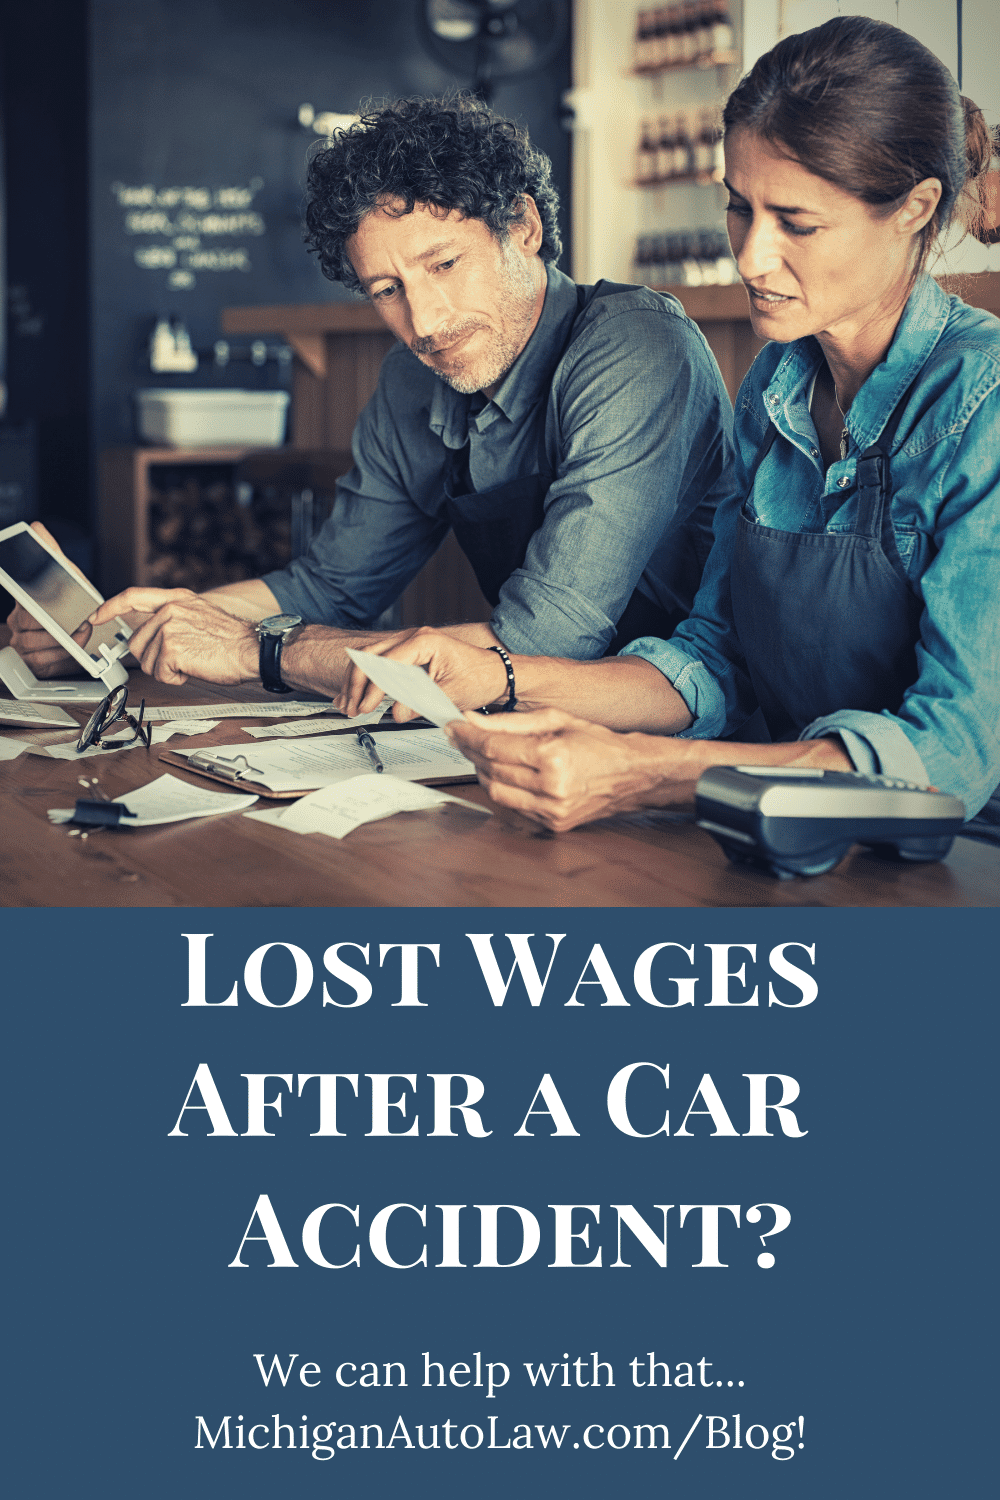 Lost Wages Claim From Car Accident: What You Need To Know